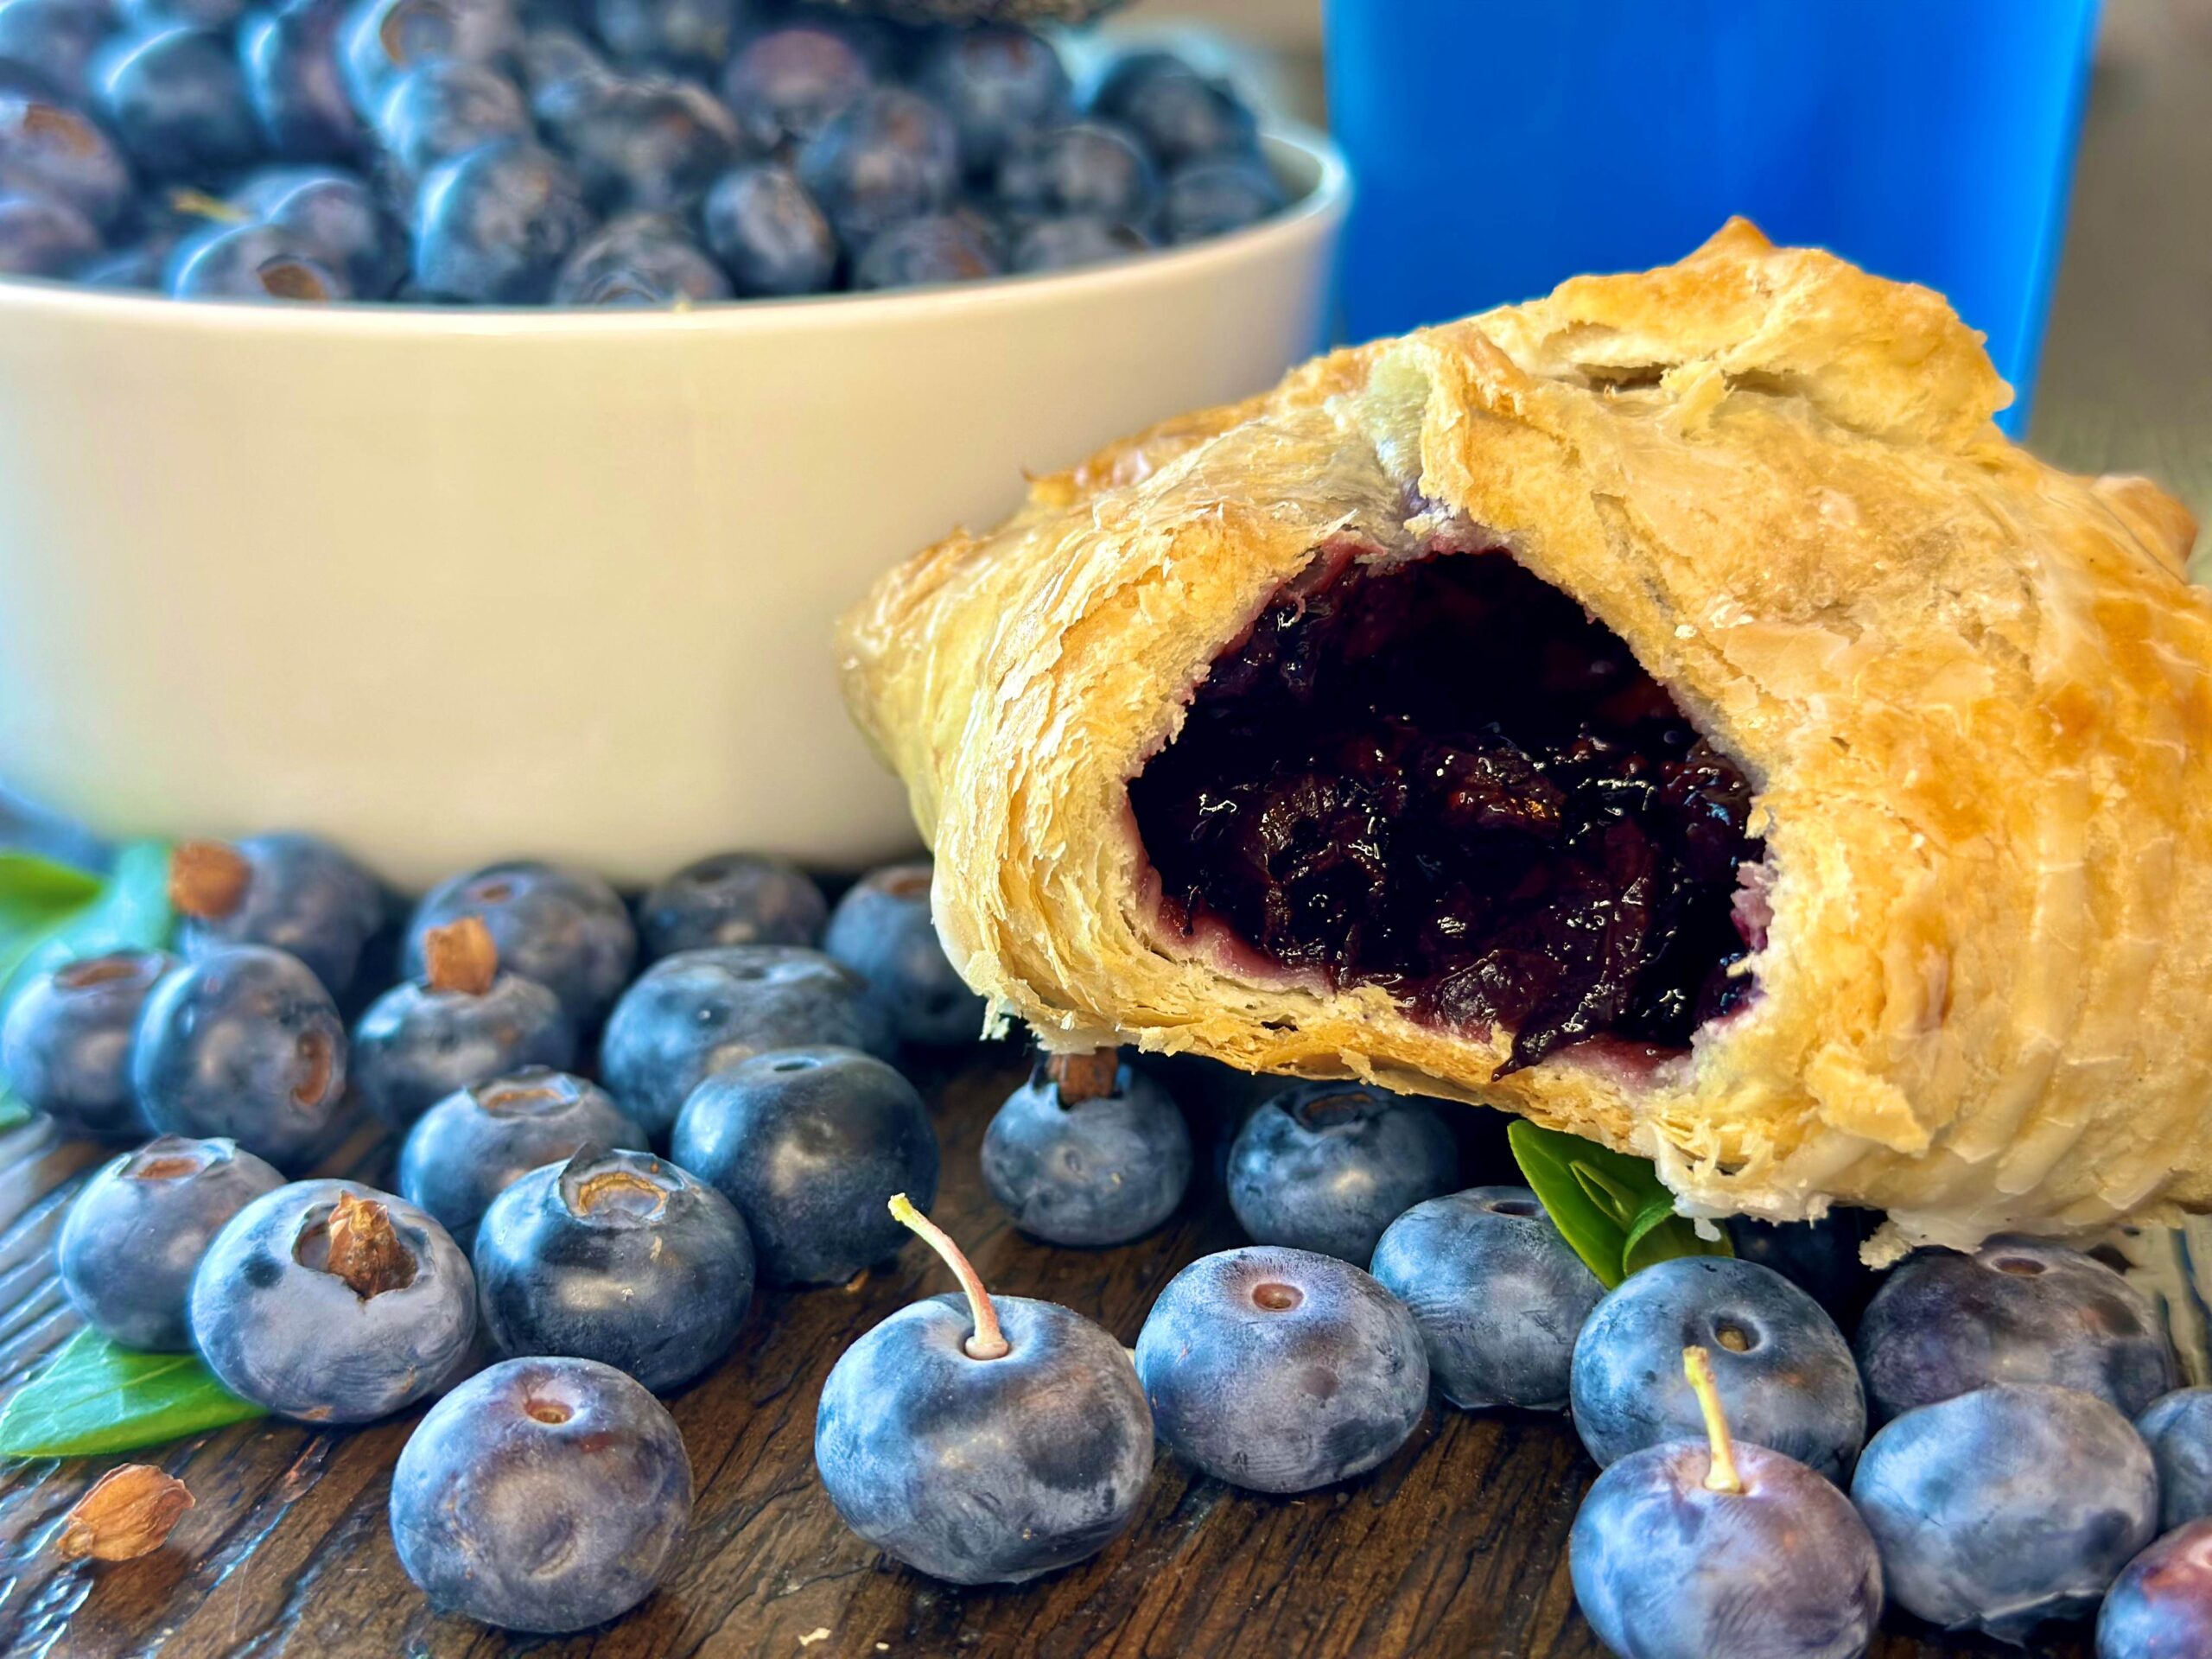 Blueberry turnover surrounded by fresh blueberries